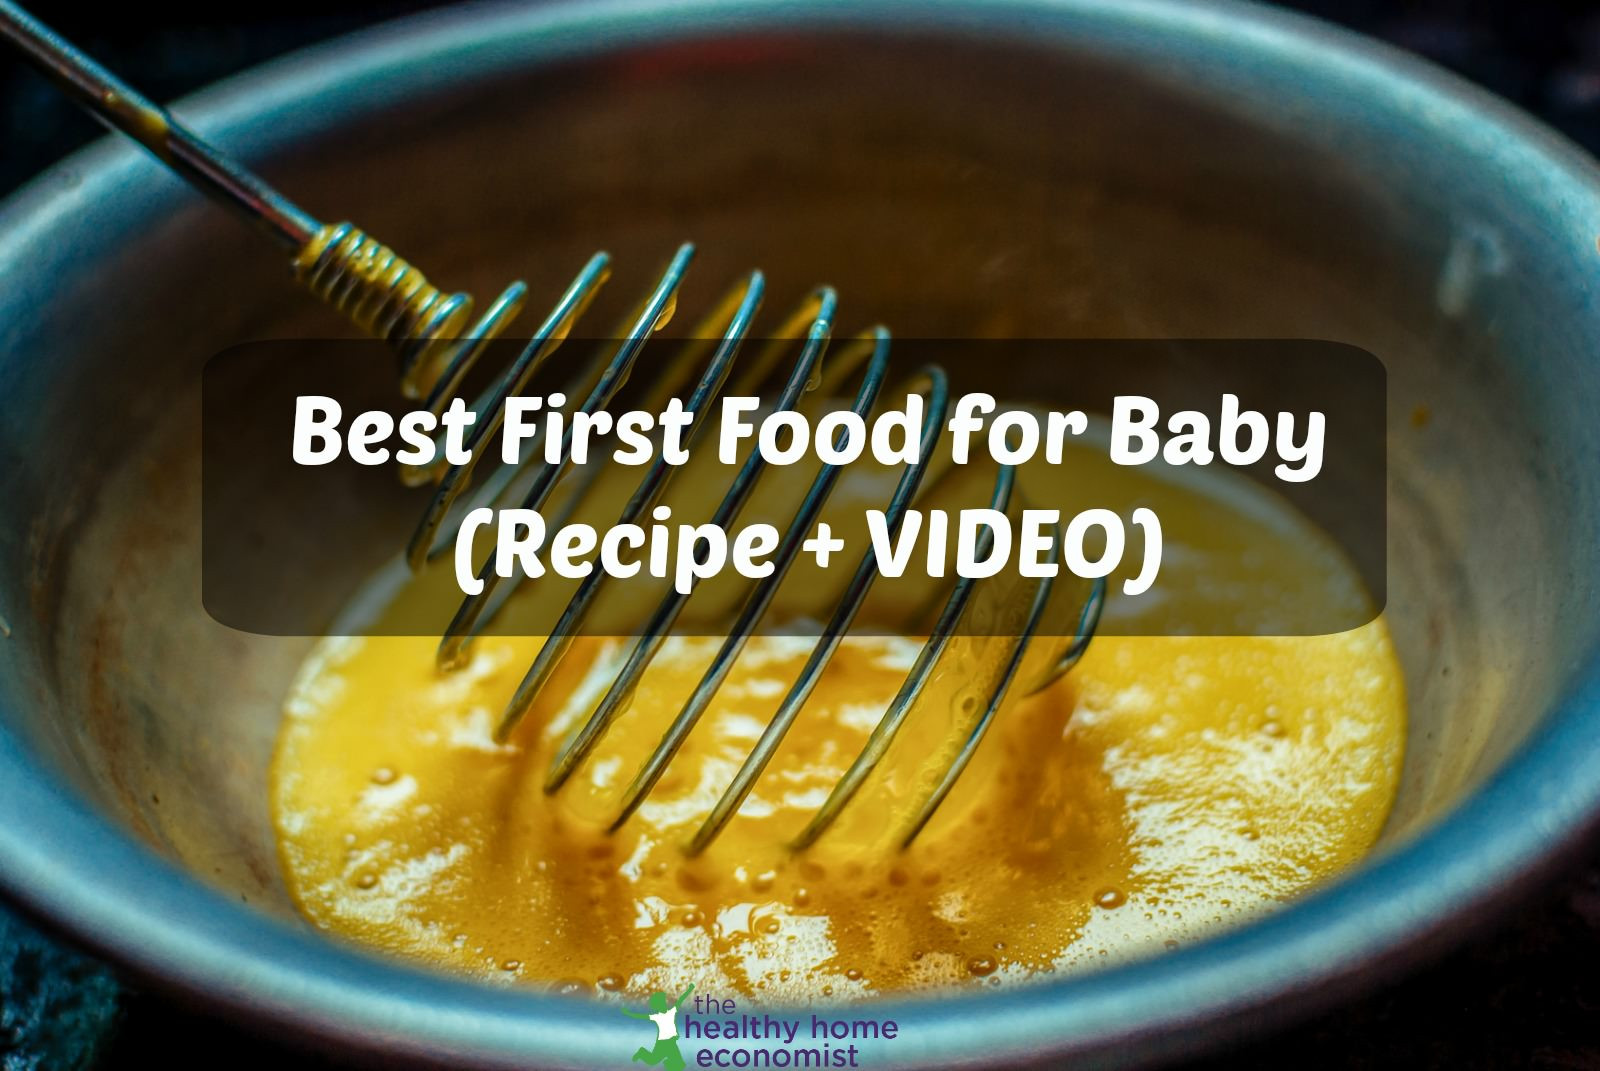 Best Baby Food Recipe Book
 Healthiest and Best Baby First Food Recipe VIDEO